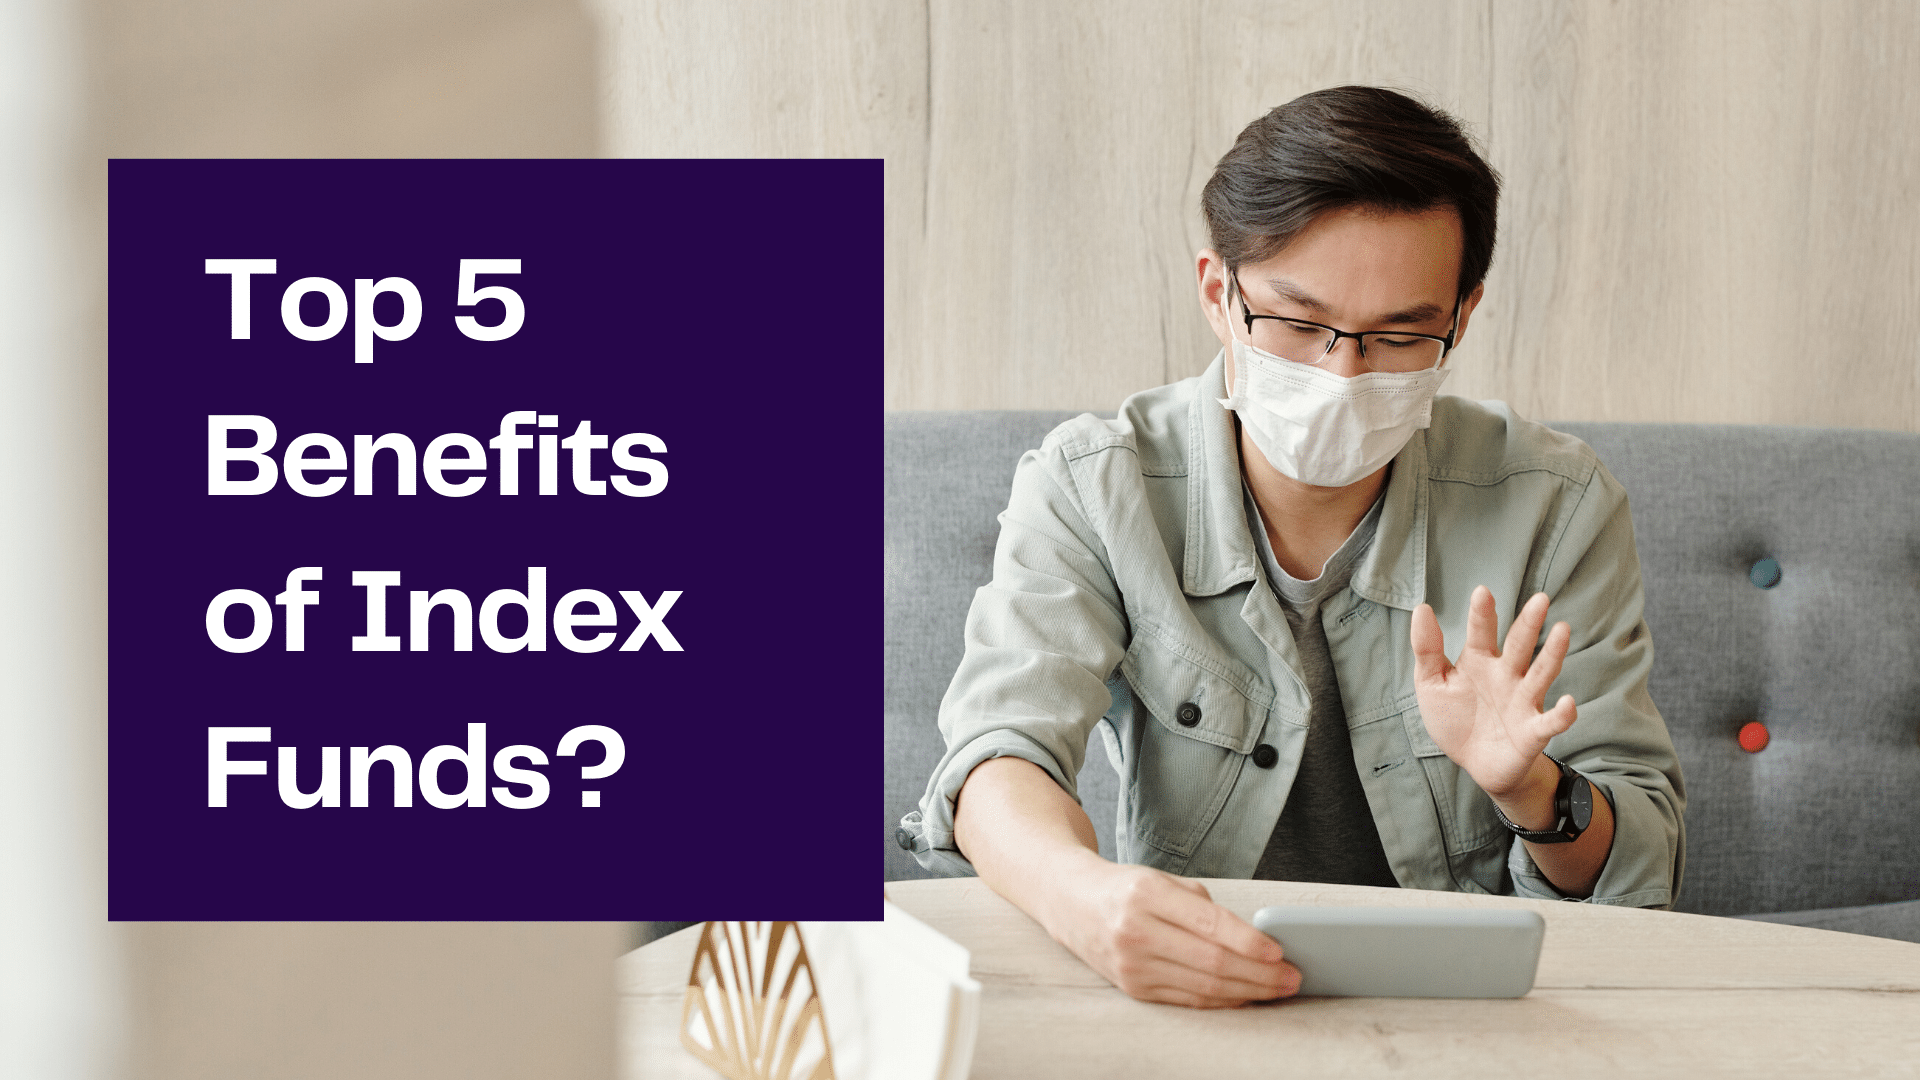 Top 5 Benefits of Index Funds - Best Index Funds in Canada